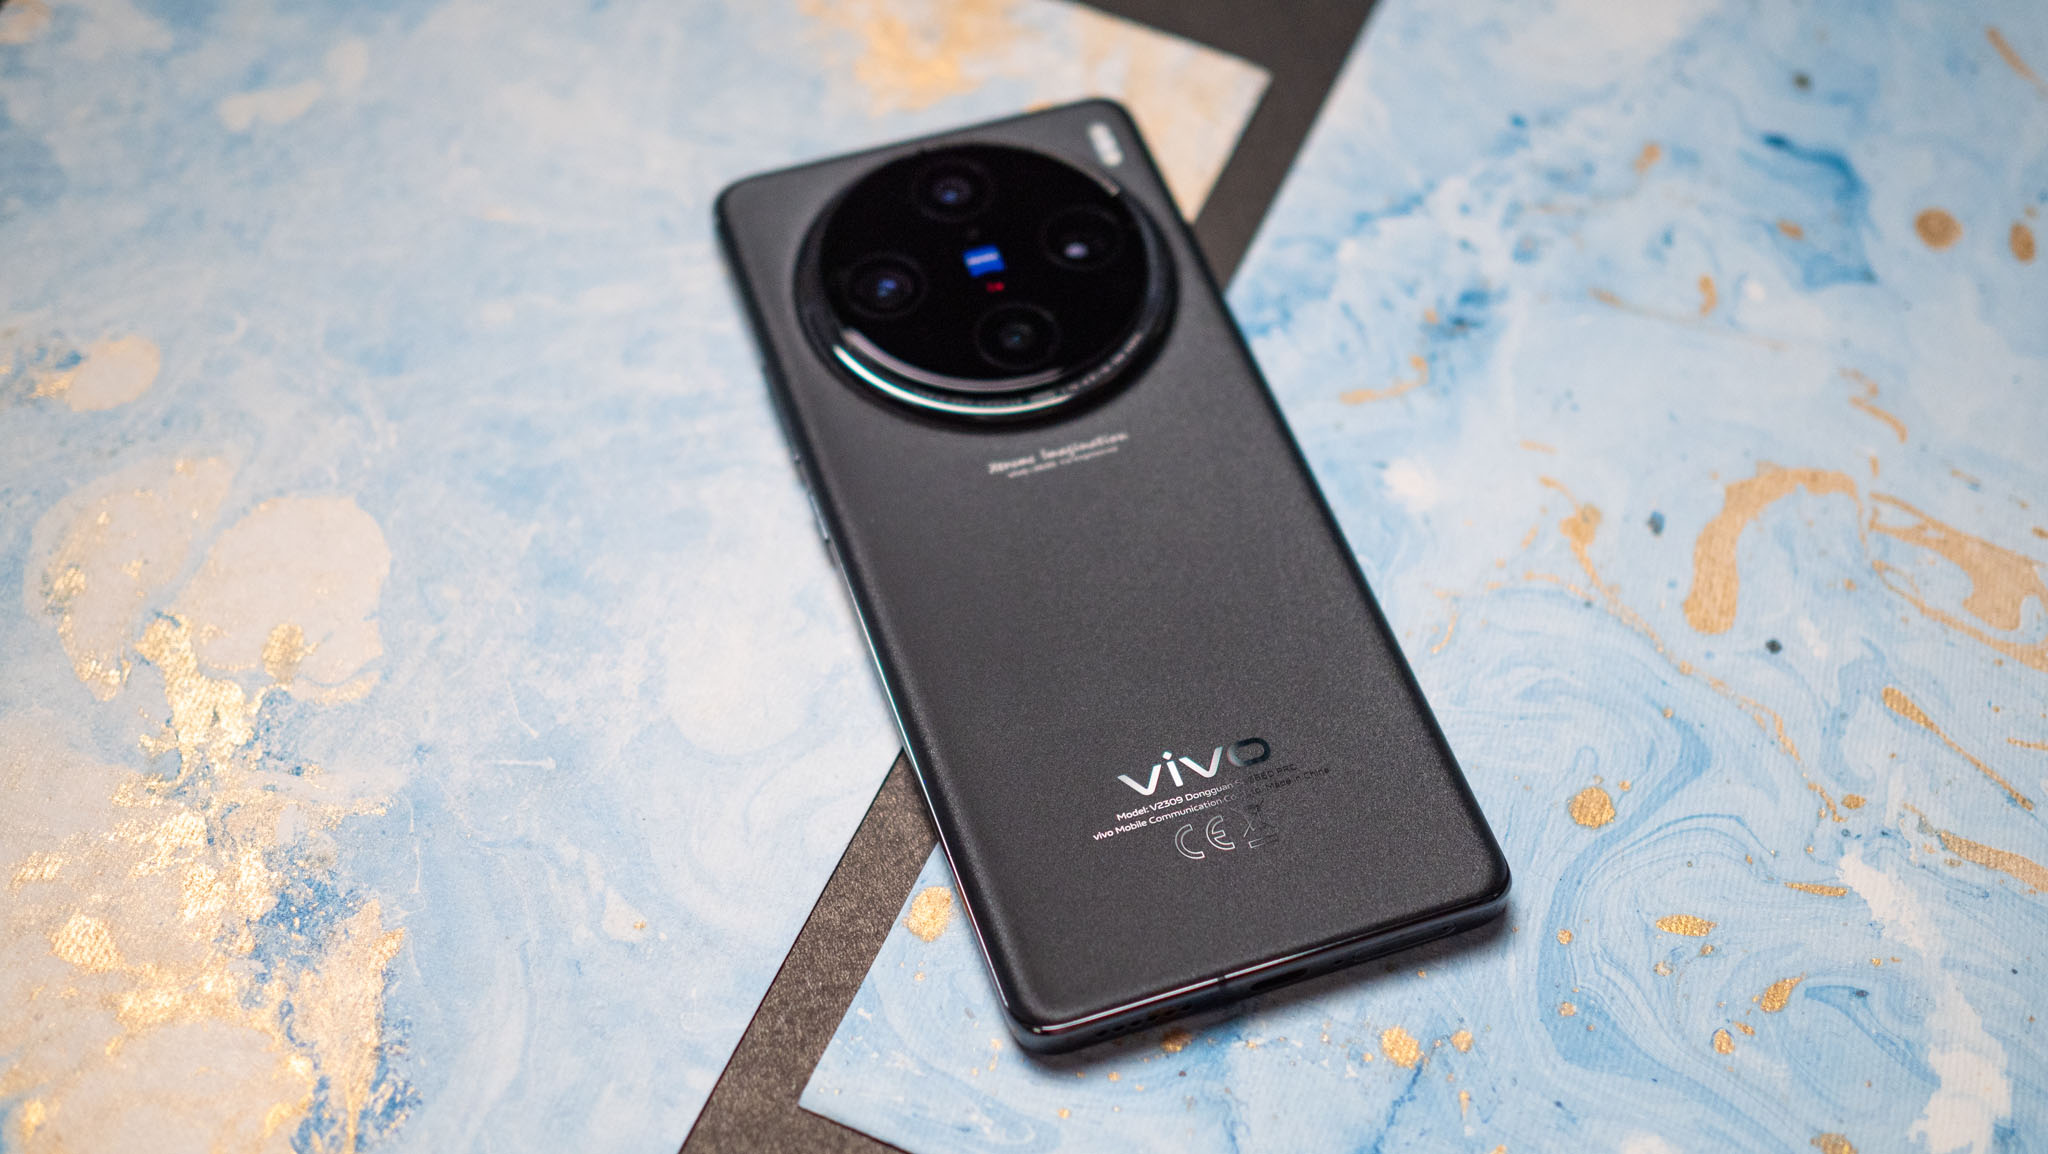 Back of the Vivo X100 Pro against colorful background